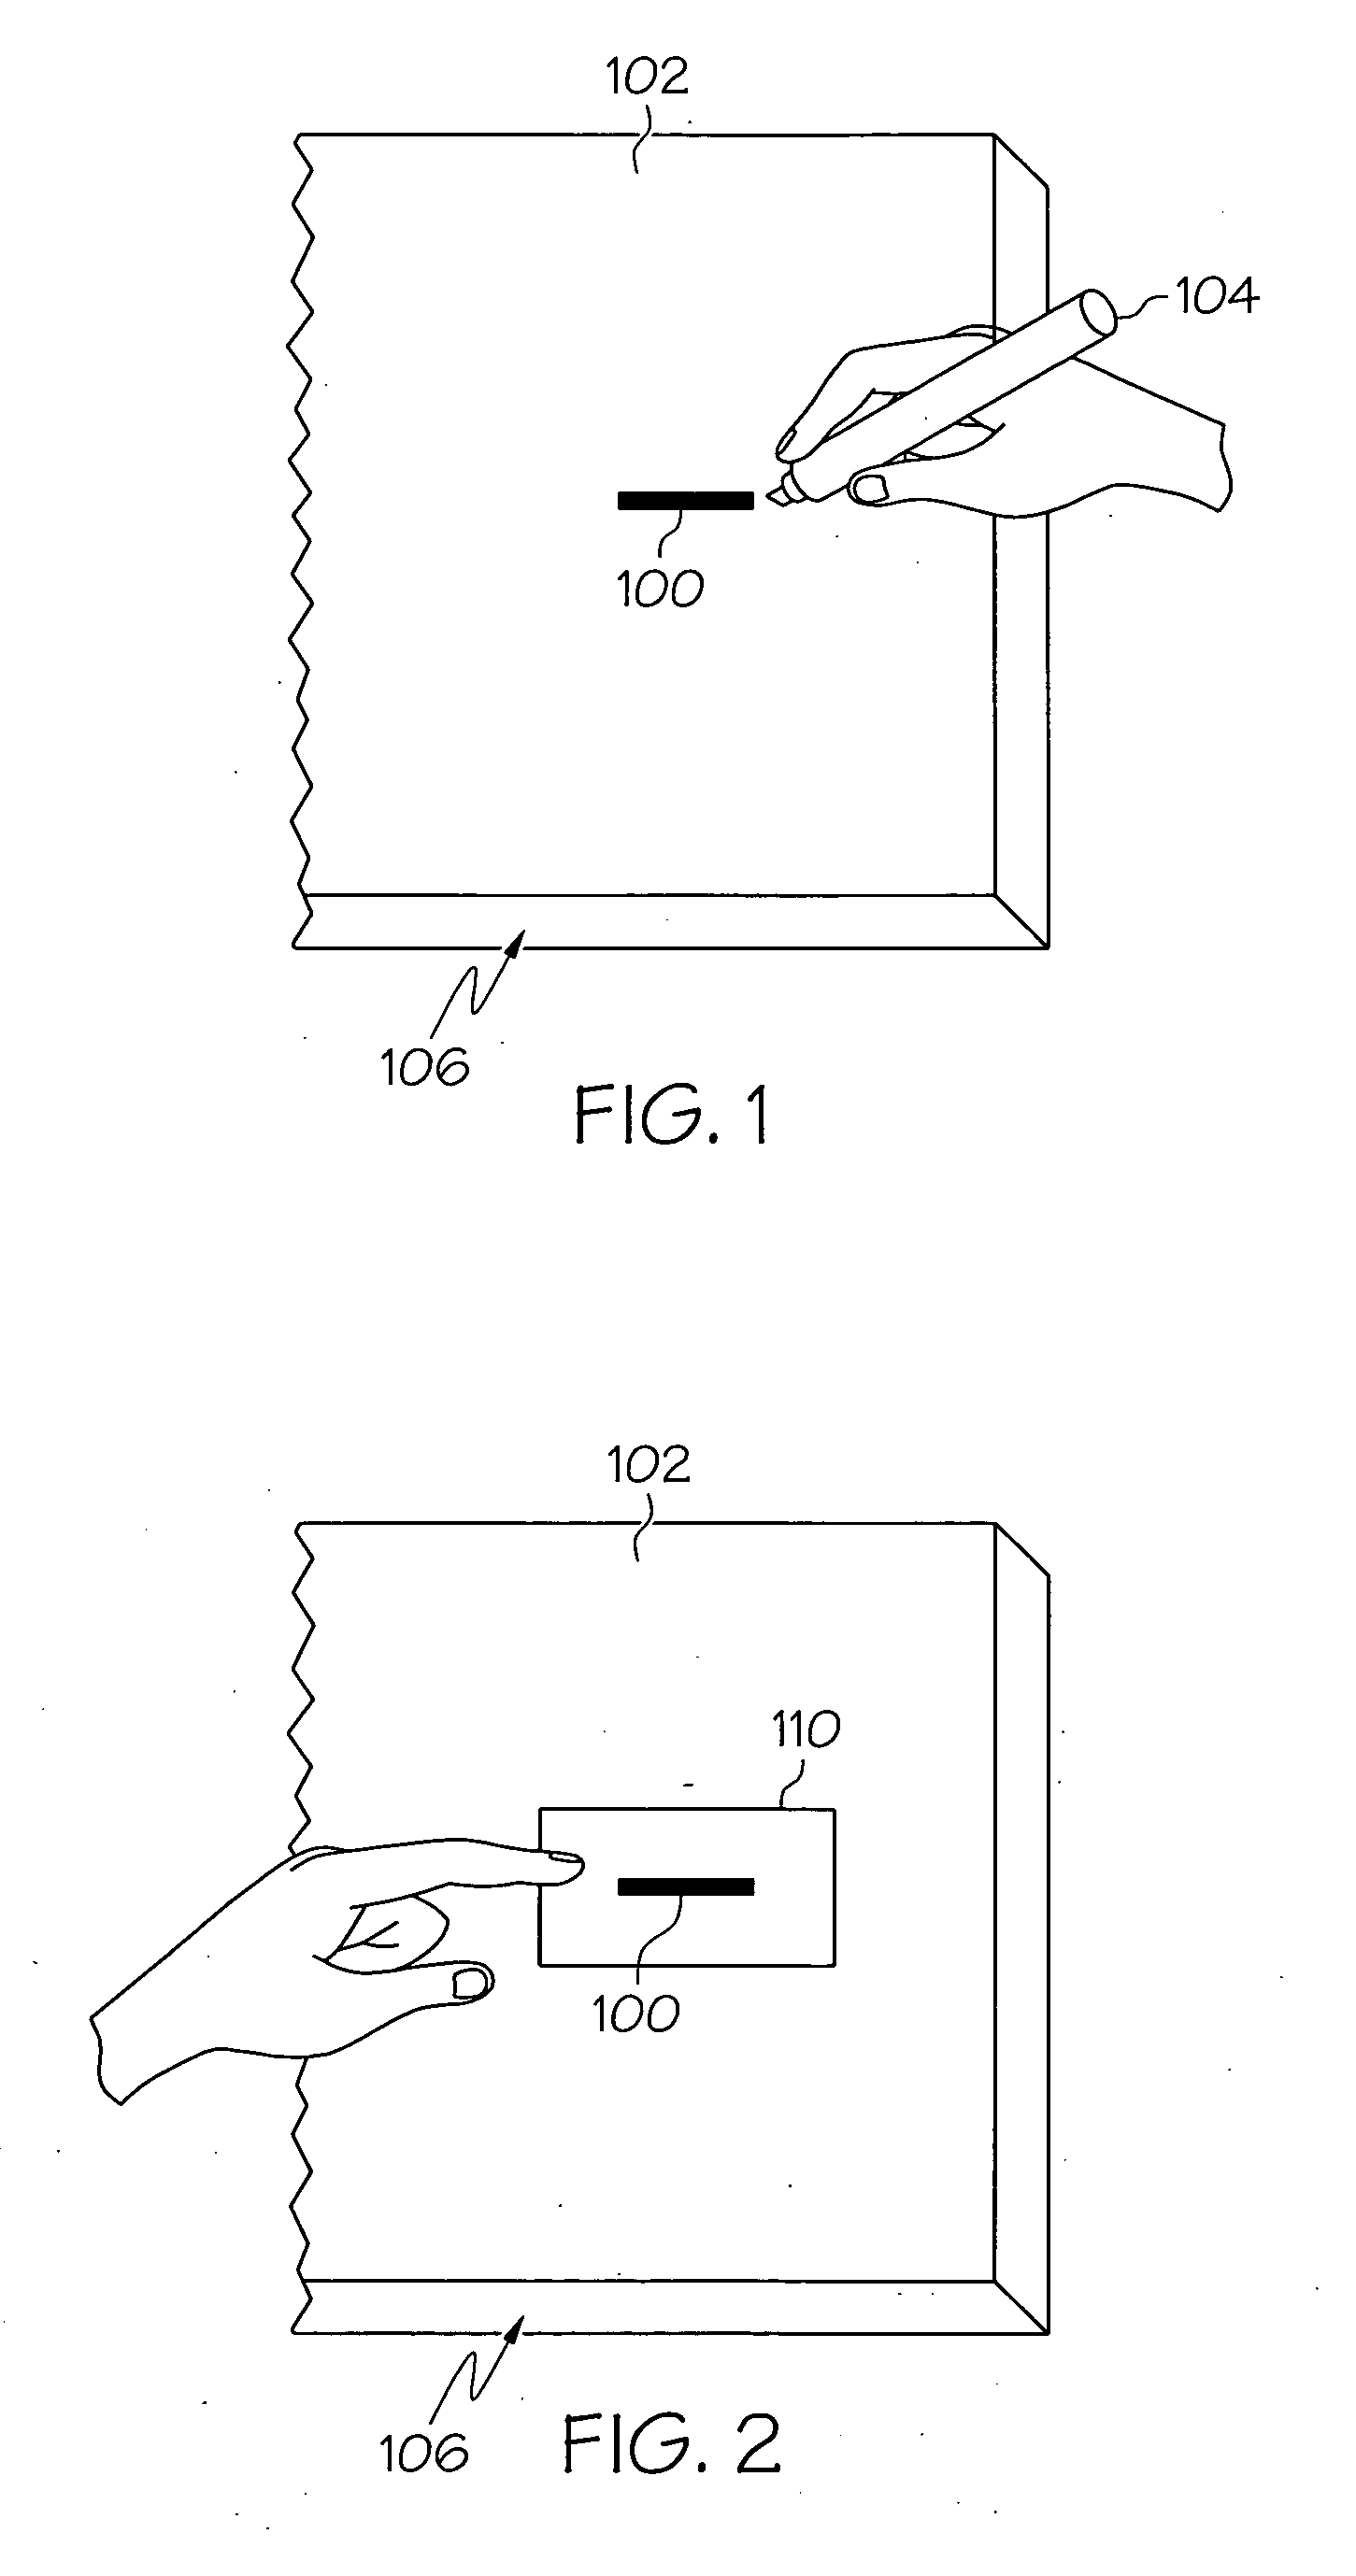 Method of sensing high surface temperatures in an aircraft